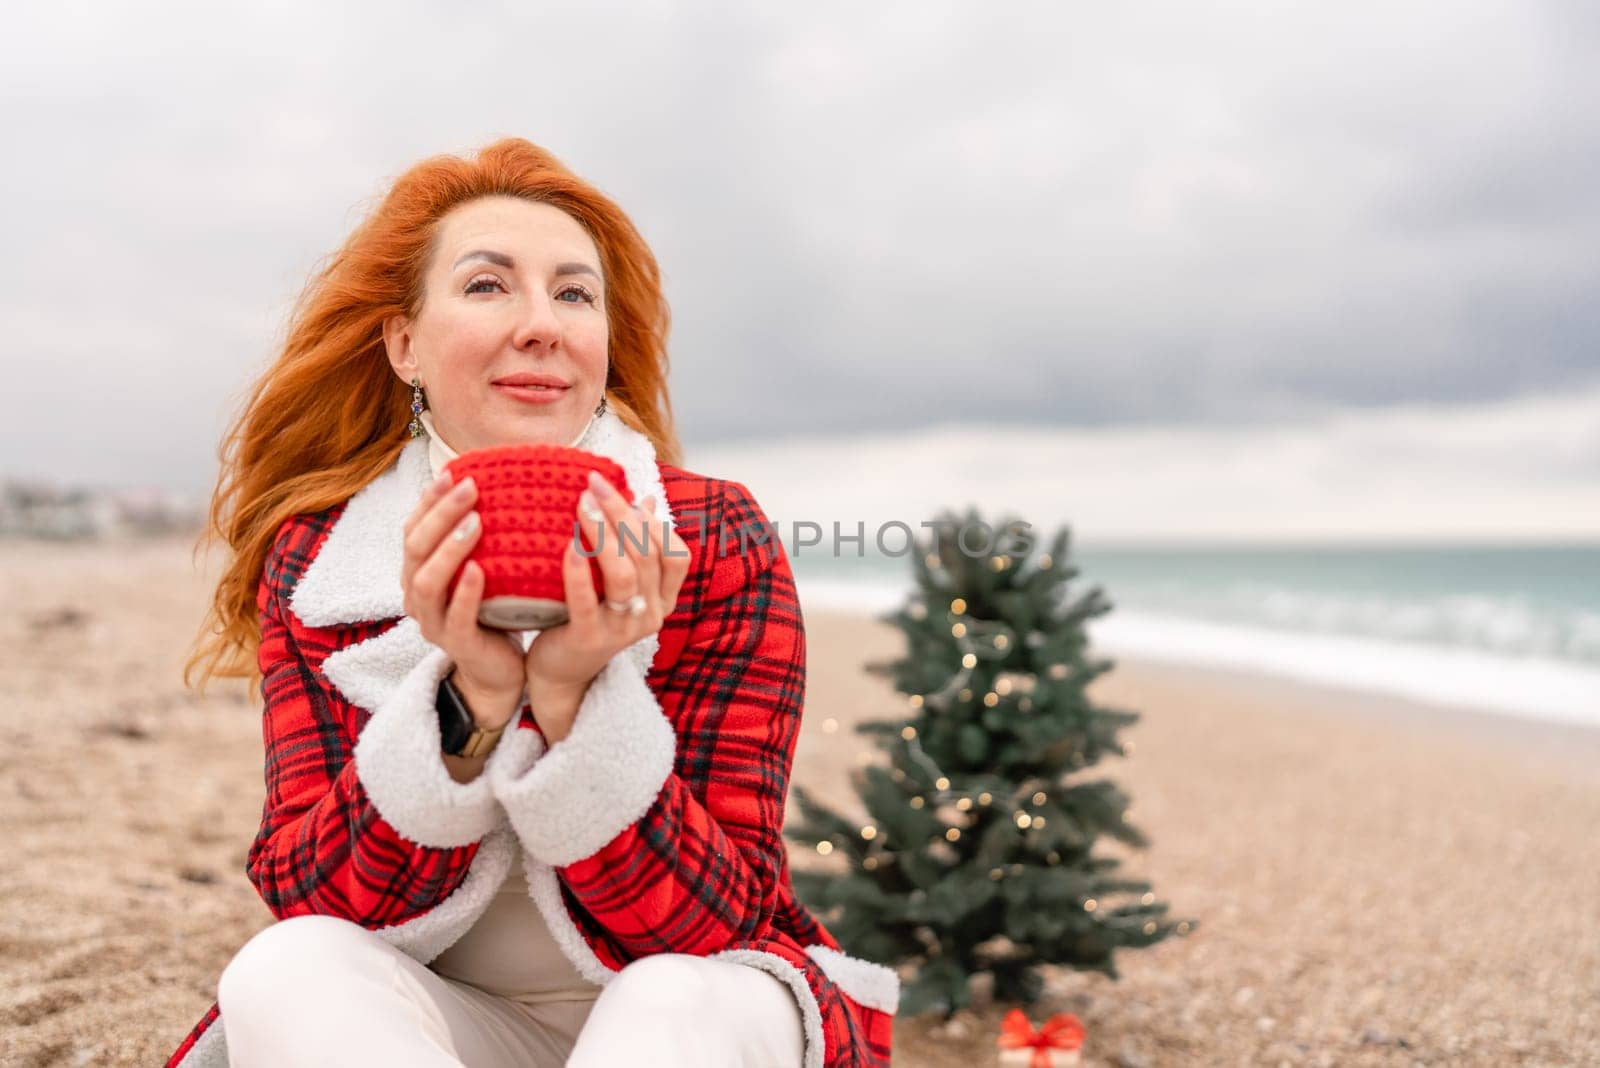 Lady in plaid shirt with a red mug in her hands enjoys beach with Christmas tree. Coastal area. Christmas, New Year holidays concep by Matiunina